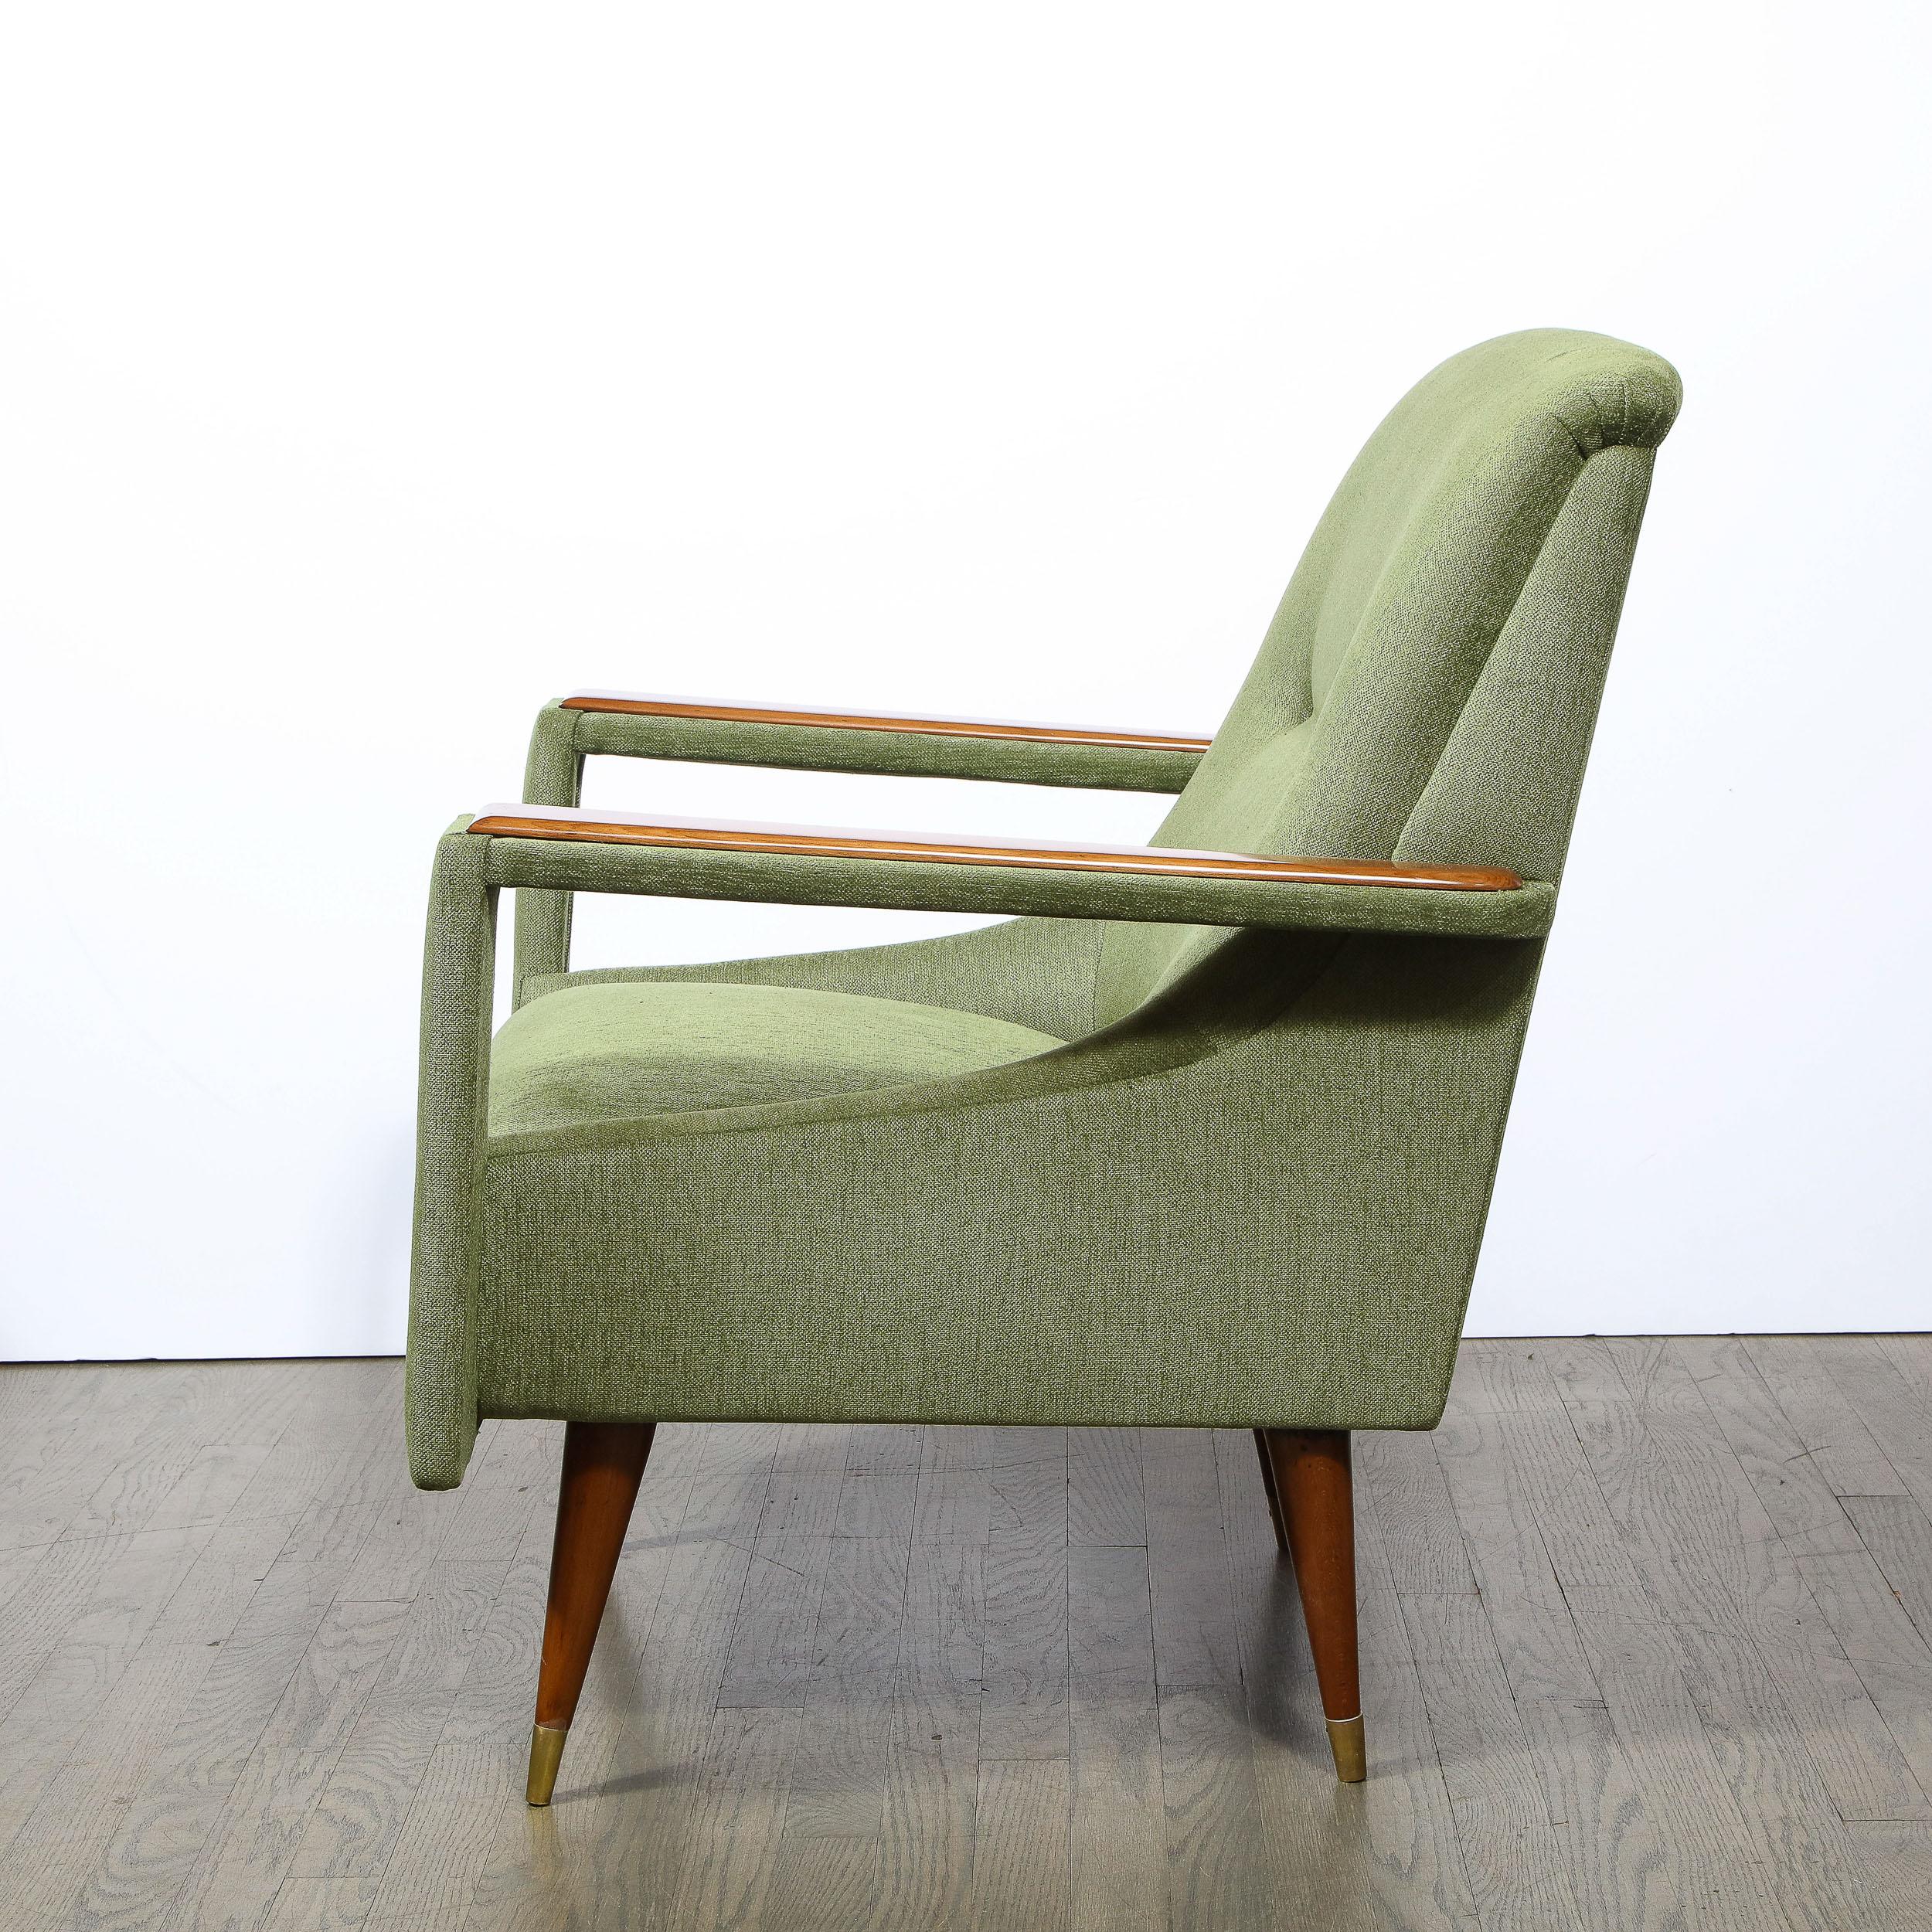 American Pair of Mid-Century Modern Walnut & Moss Green Upholstery Arm Cutout Chairs